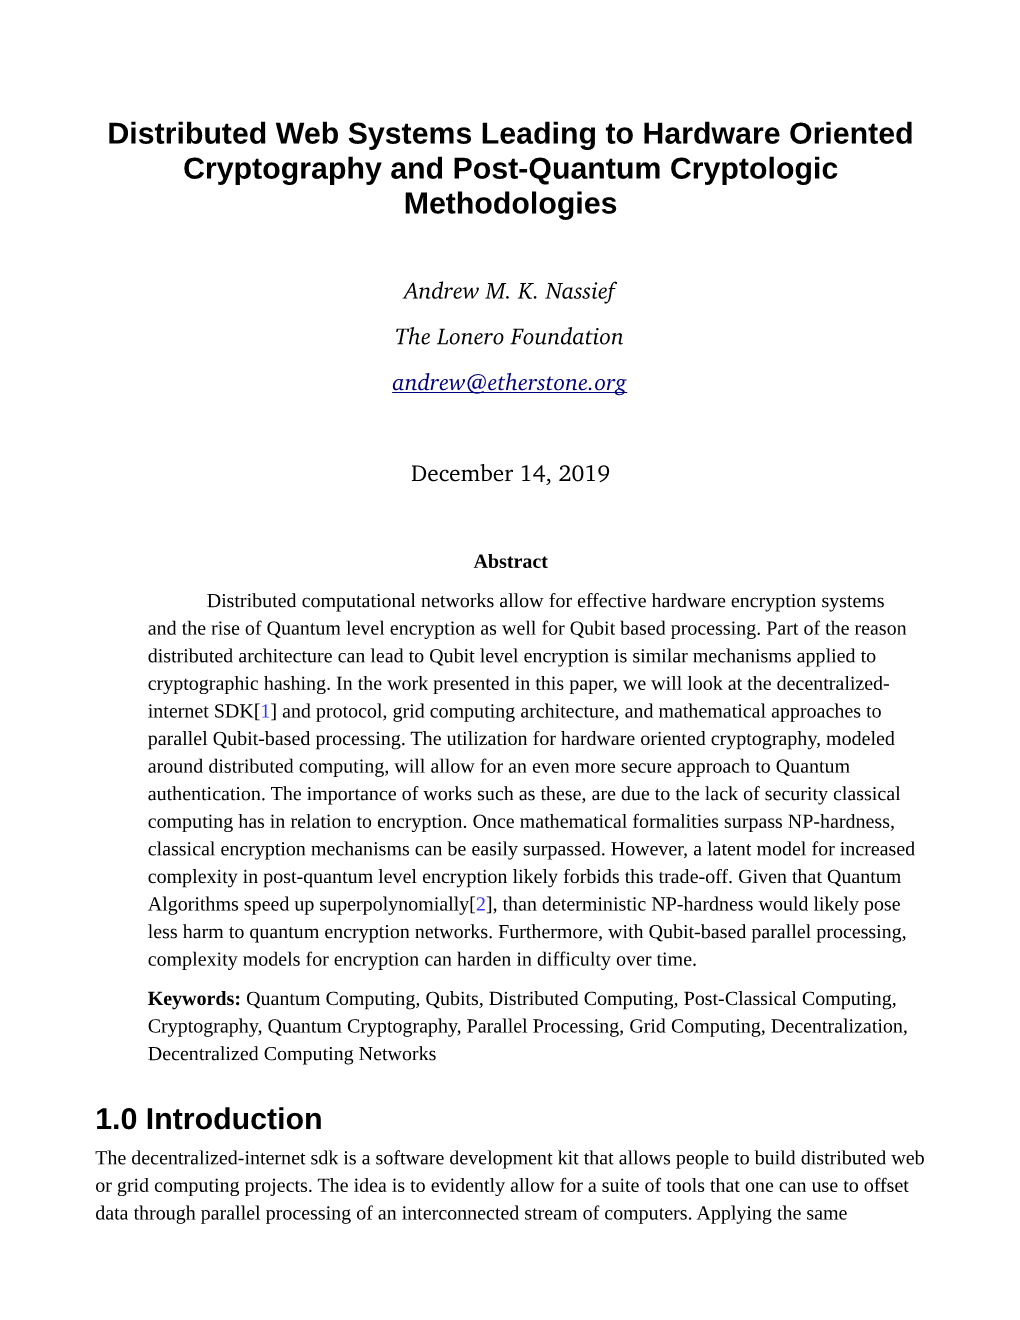 Distributed Web Systems Leading to Hardware Oriented Cryptography and Post-Quantum Cryptologic Methodologies